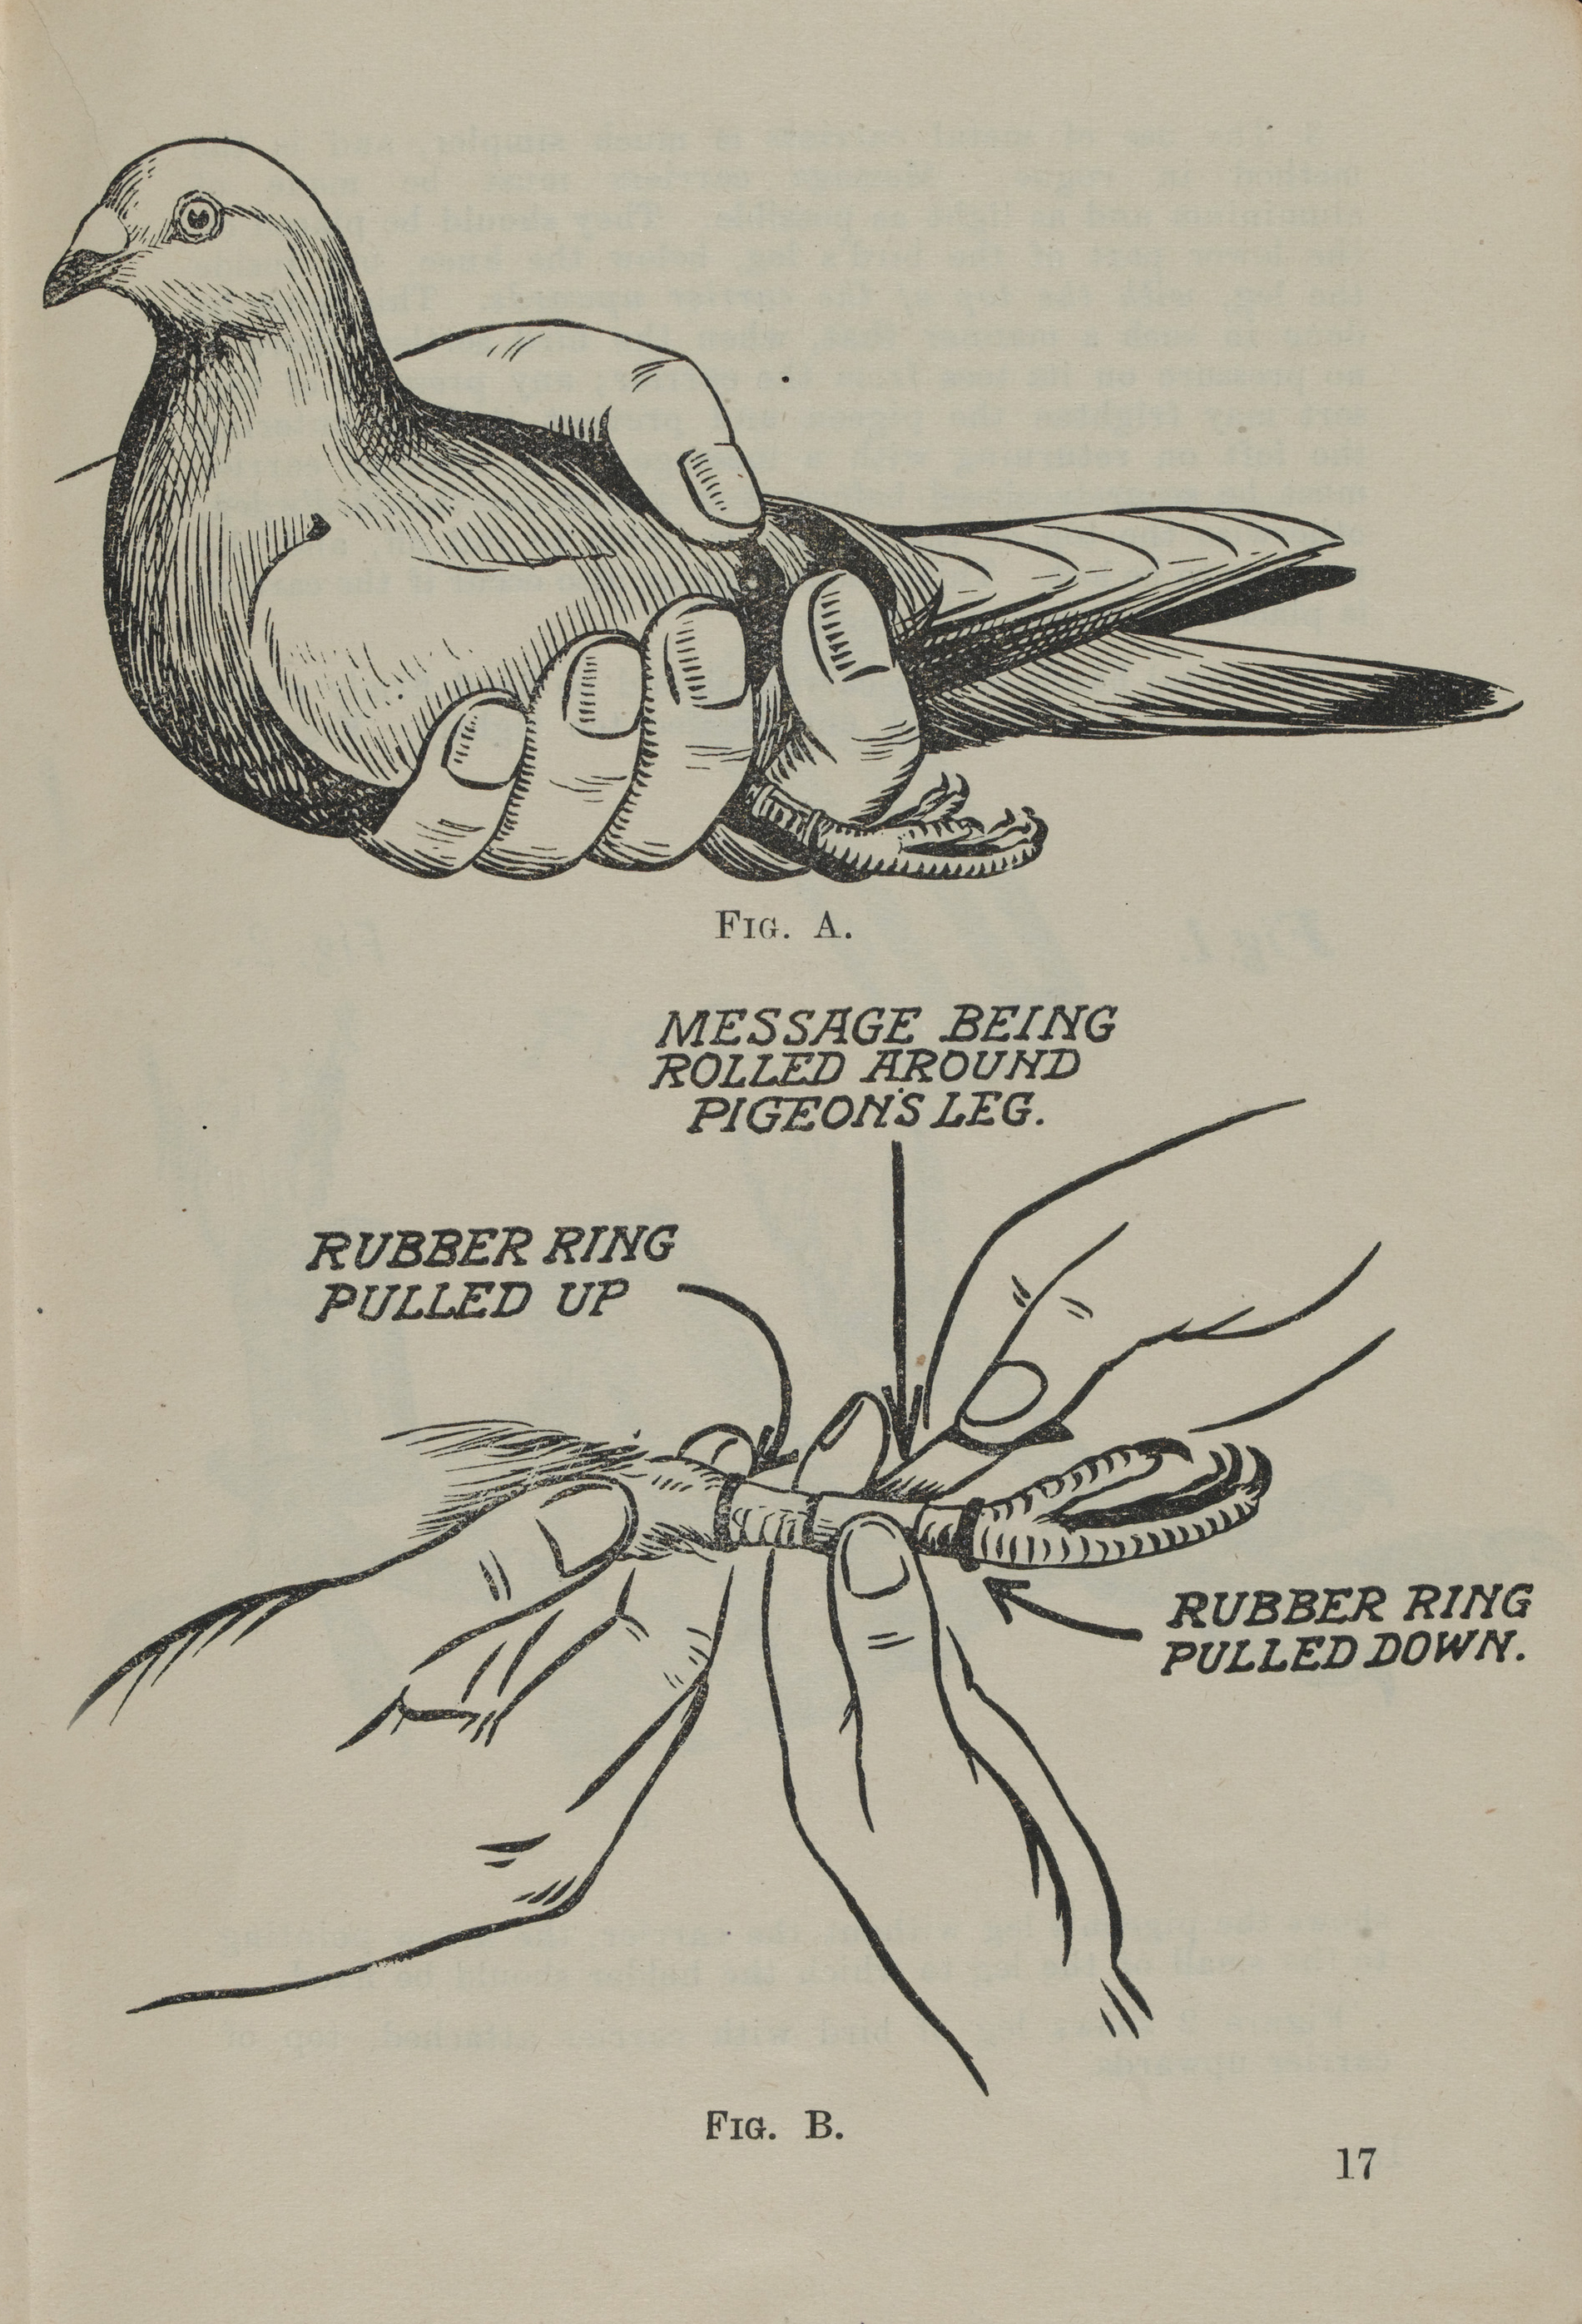 This page from ‘Carrier Pigeons in War’ shows how to tie a message around a bird’s leg.